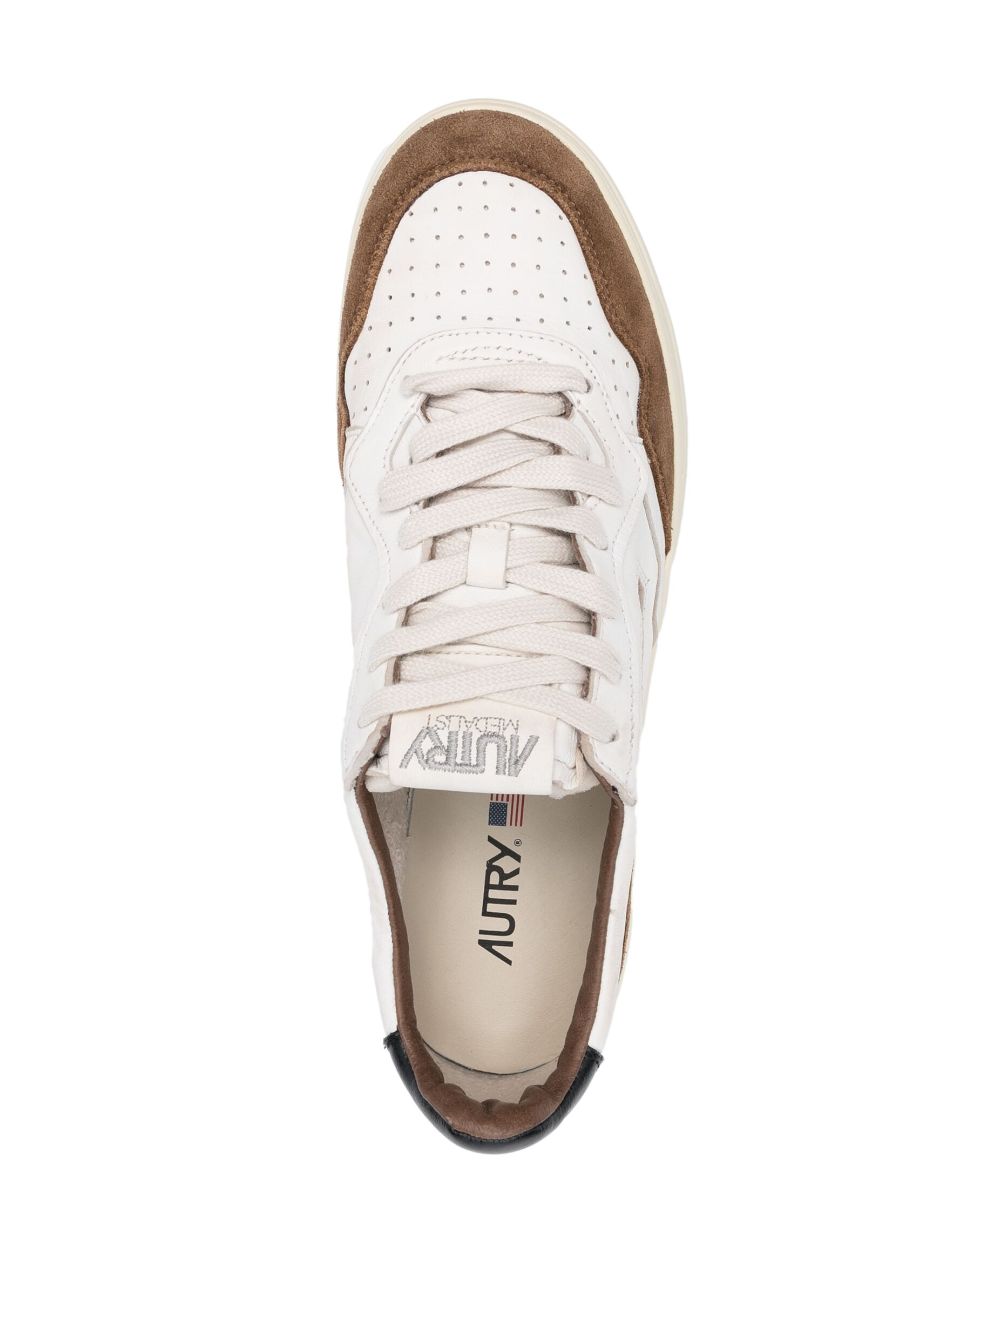 white and brown medalist sneaker